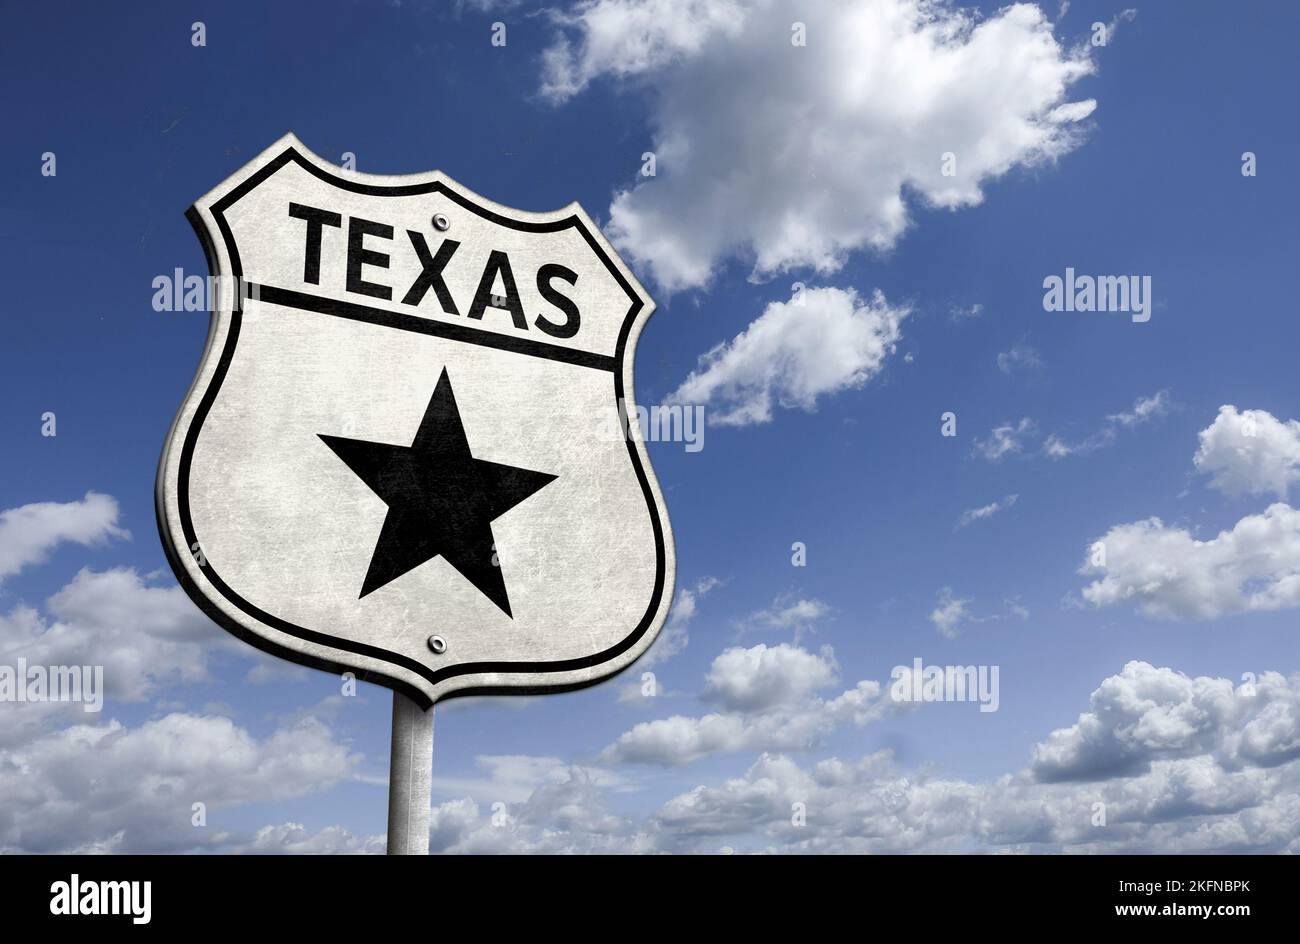 Texas - The lone star state - traffic road sign Stock Photo